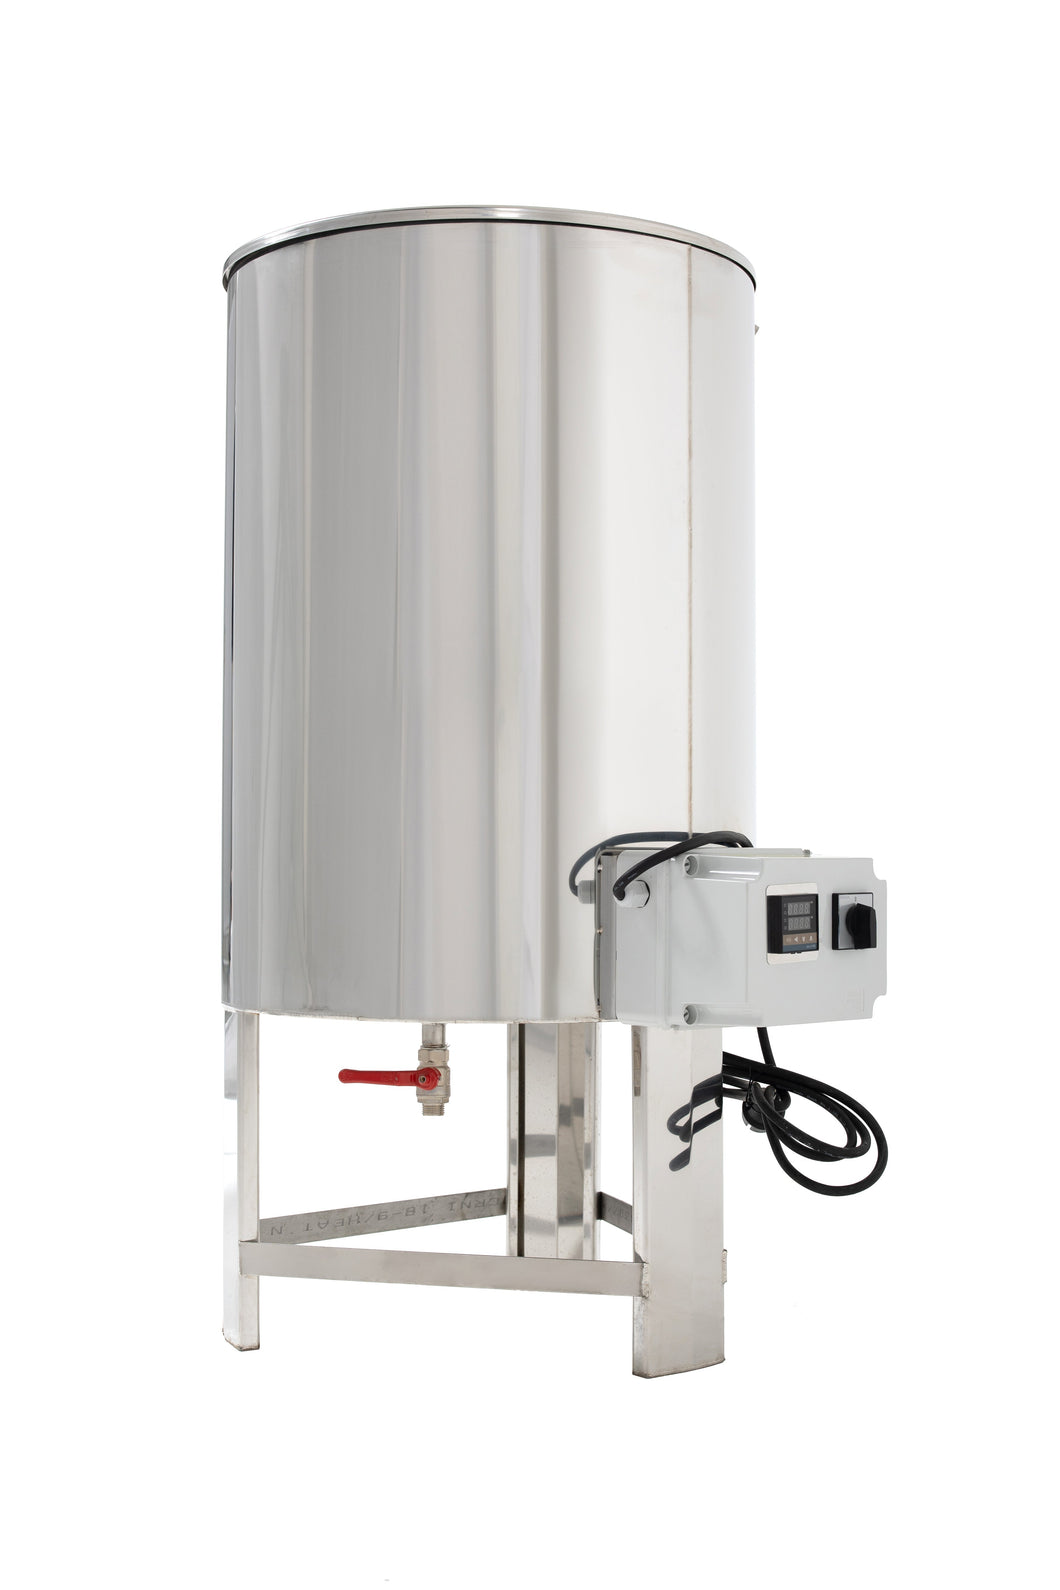 Honey Tank with Legs, Heated, with mixing paddles 130 gallon / 500 L - TT-FK-500